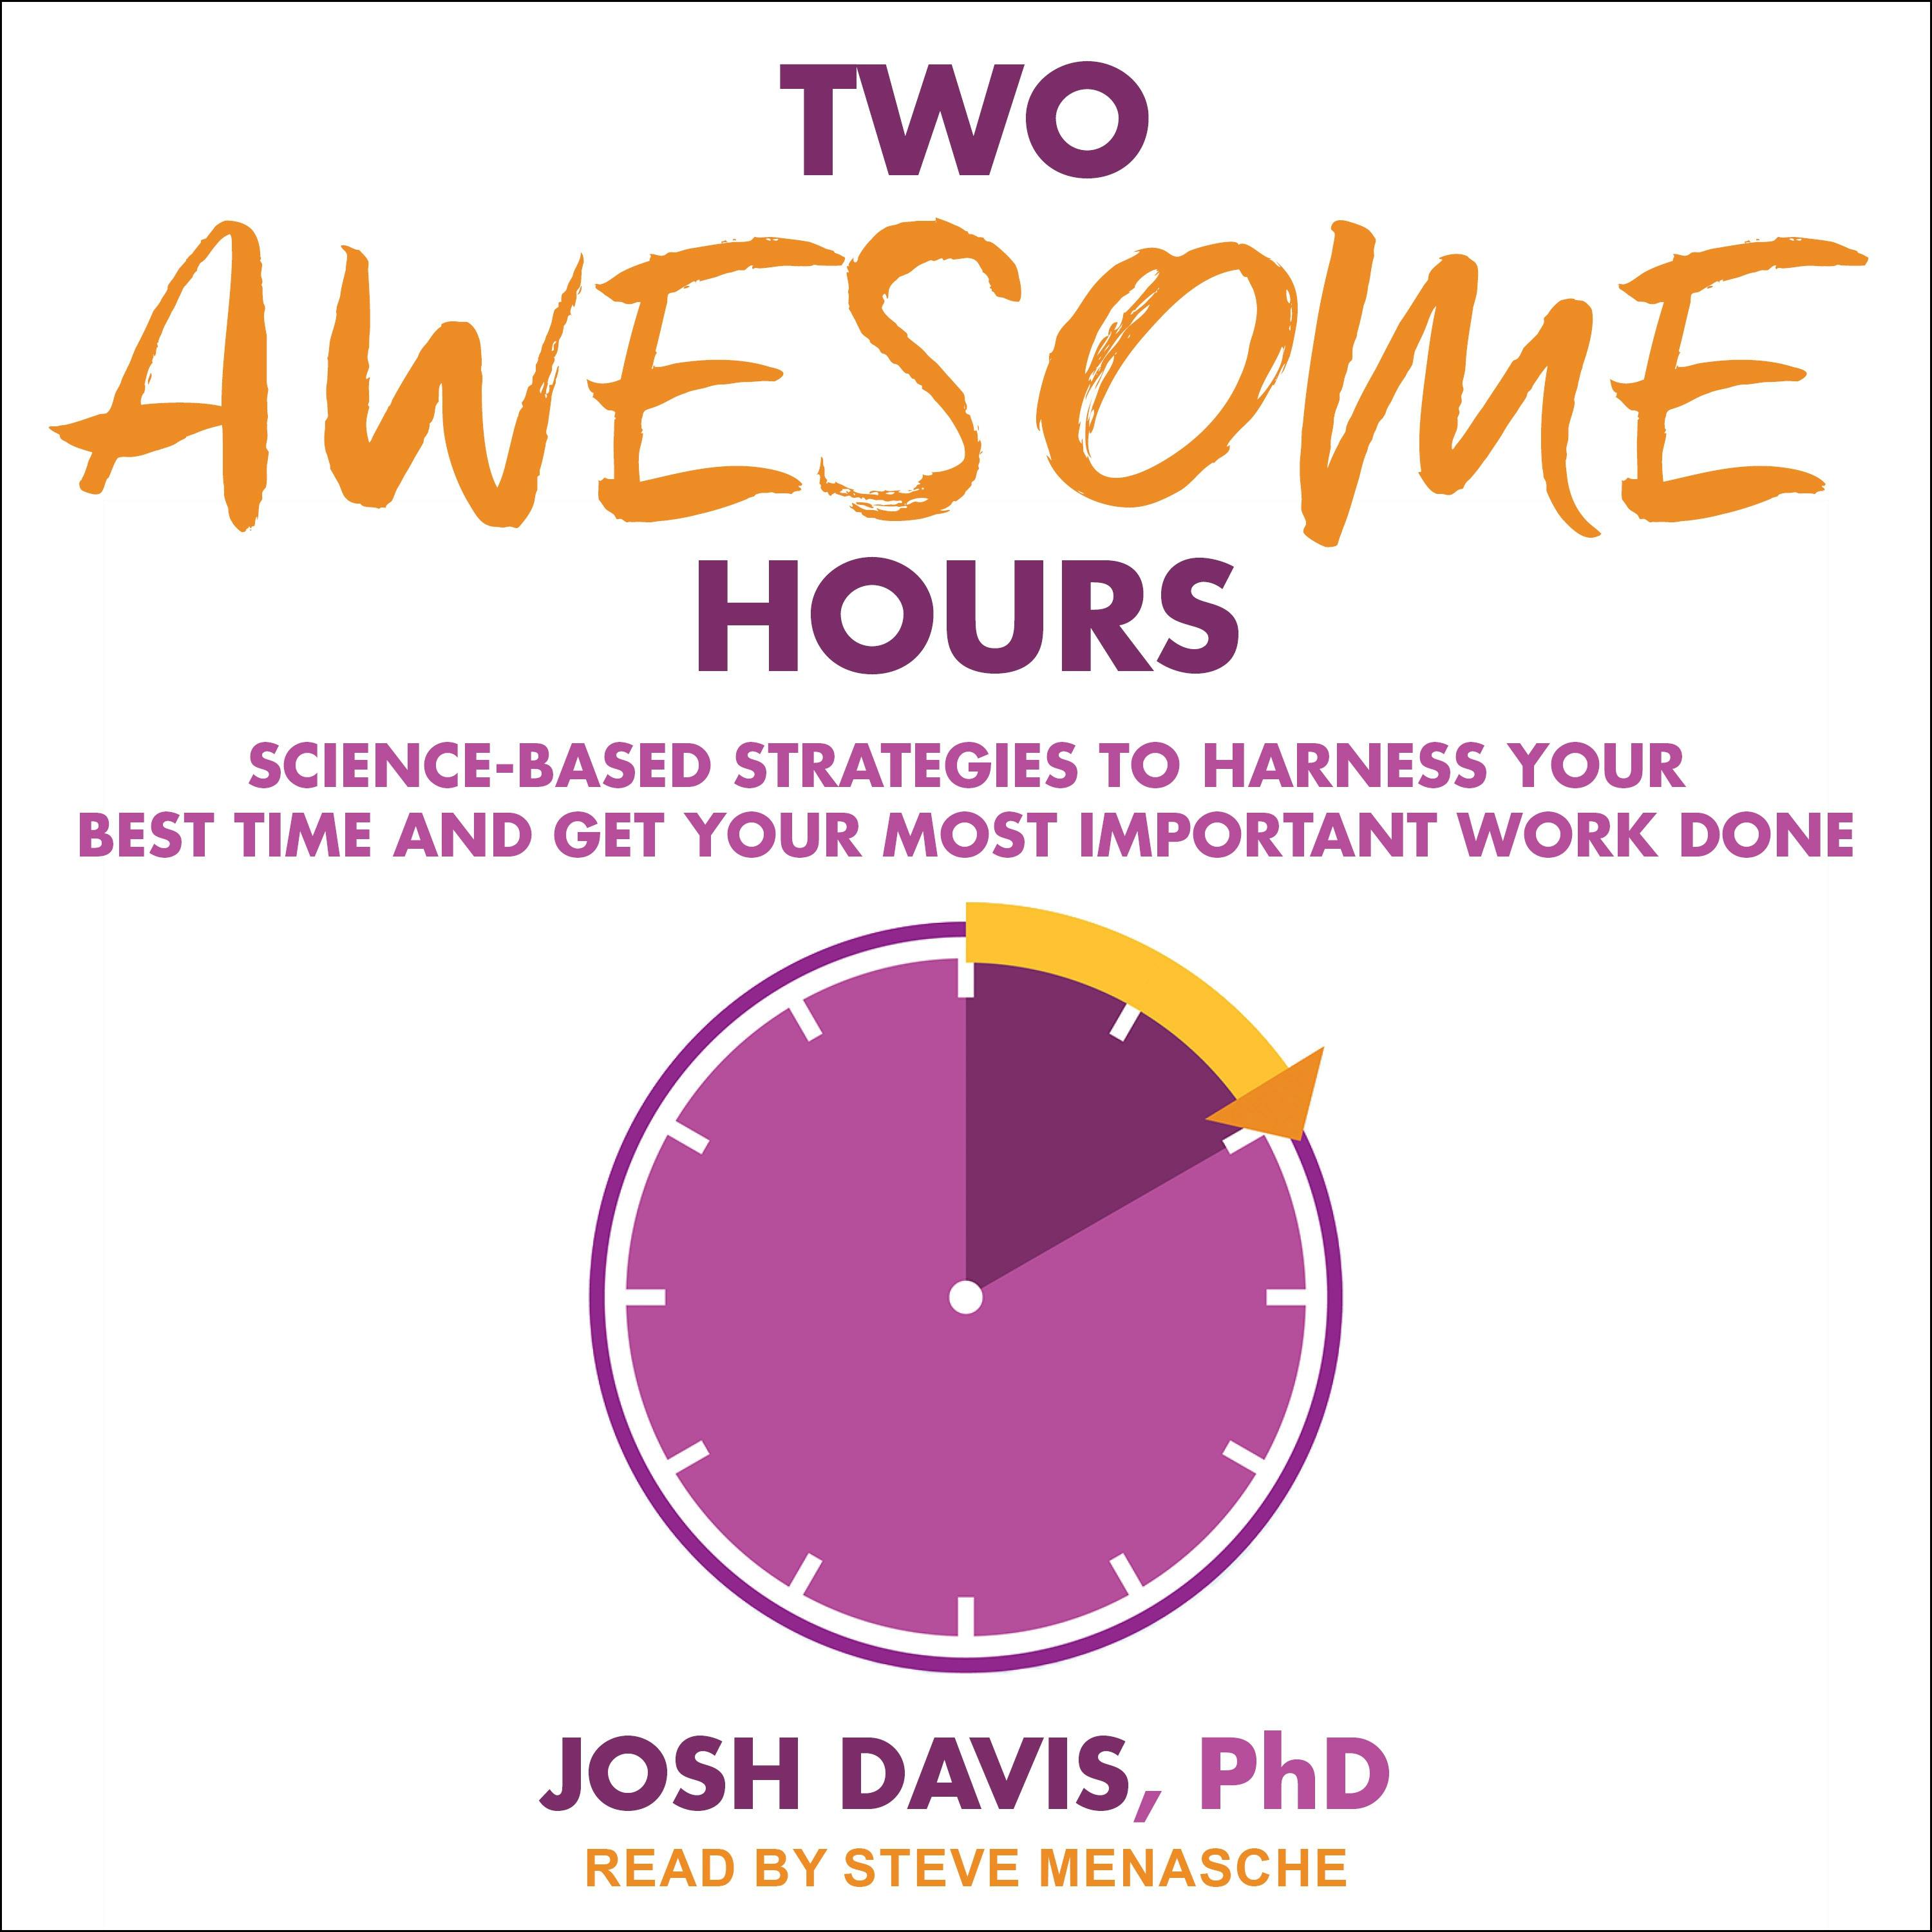 Two Awesome Hours: Science-Based Strategies to Harness Your Best Time and Get Your Most Important Work Done - undefined